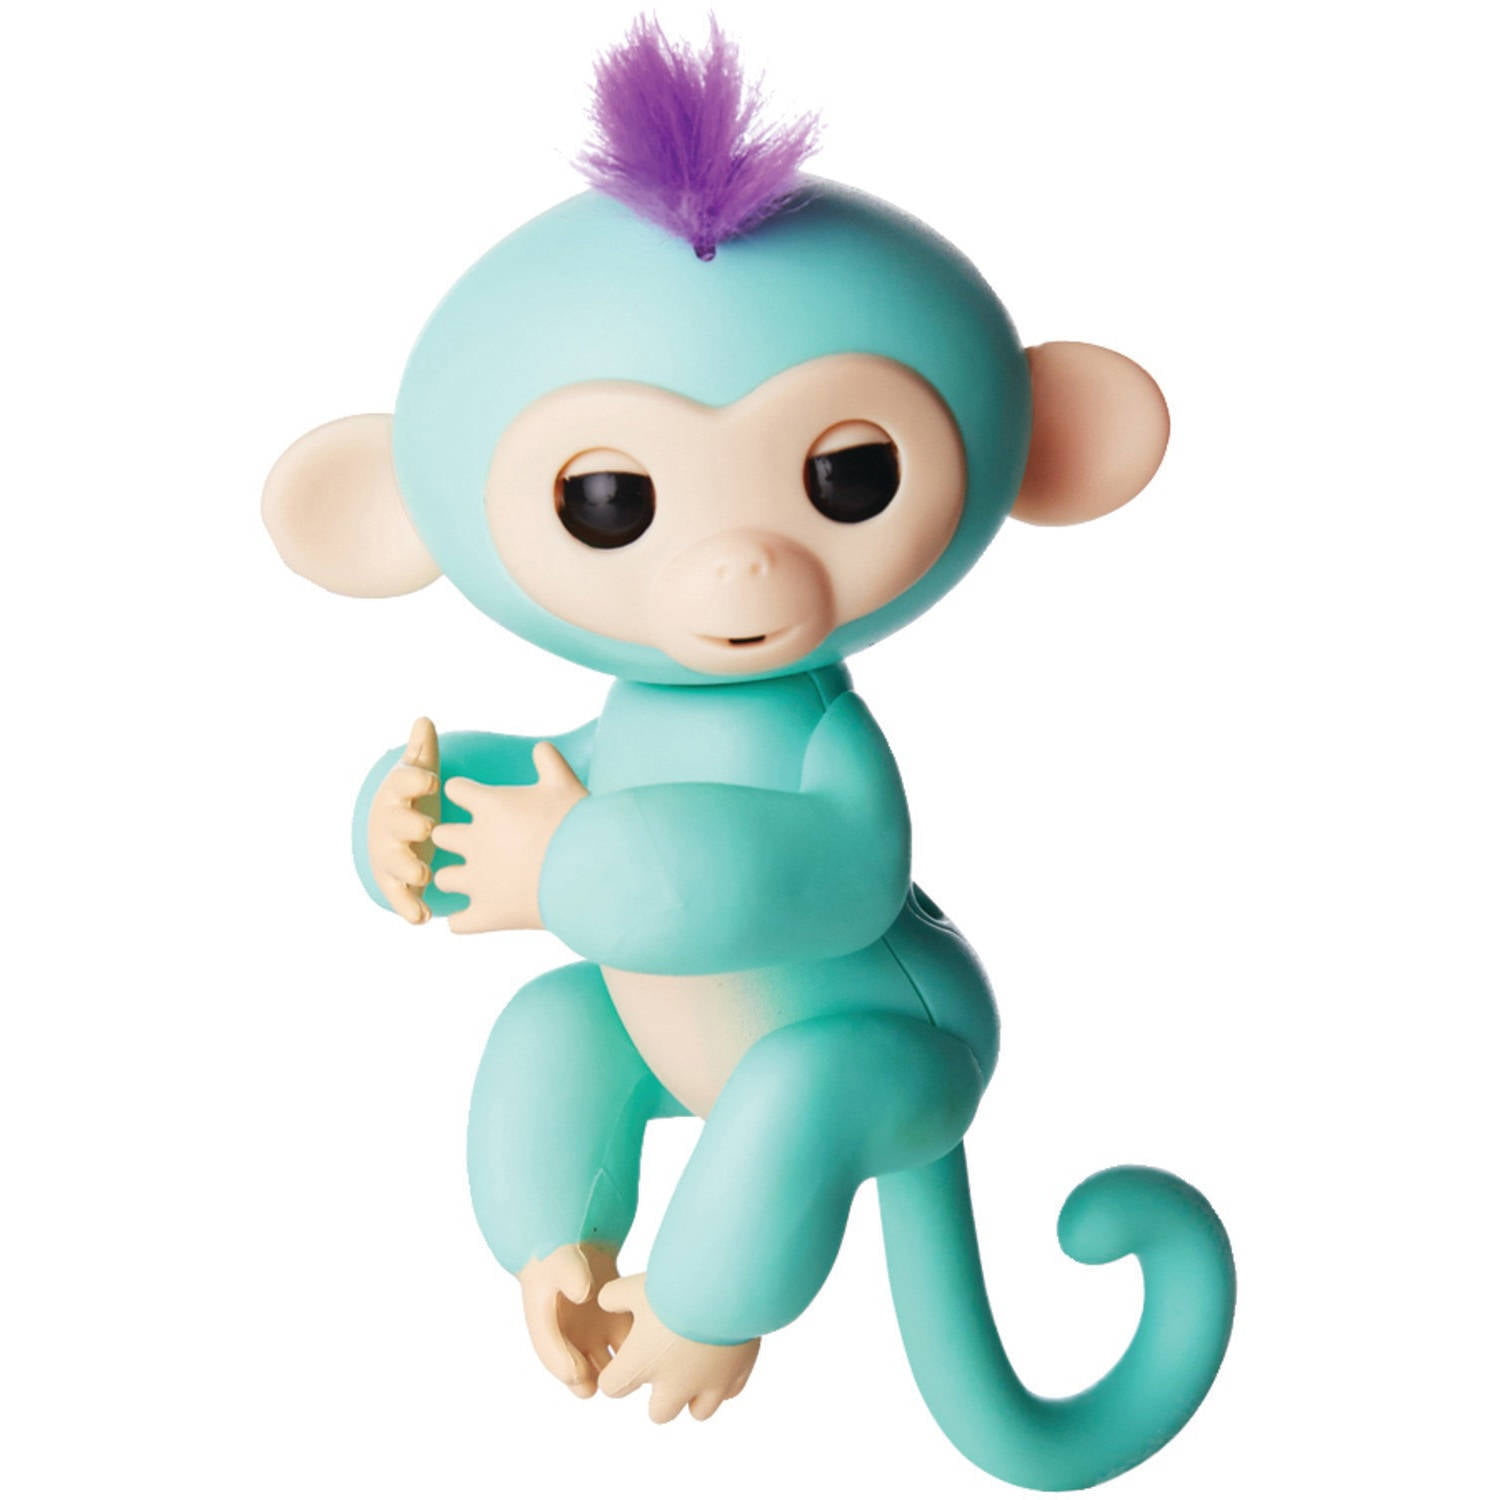 WowWee Fingerlings Zoe Baby Monkey Interactive Toy 100 Authentic Turquoise for sale online